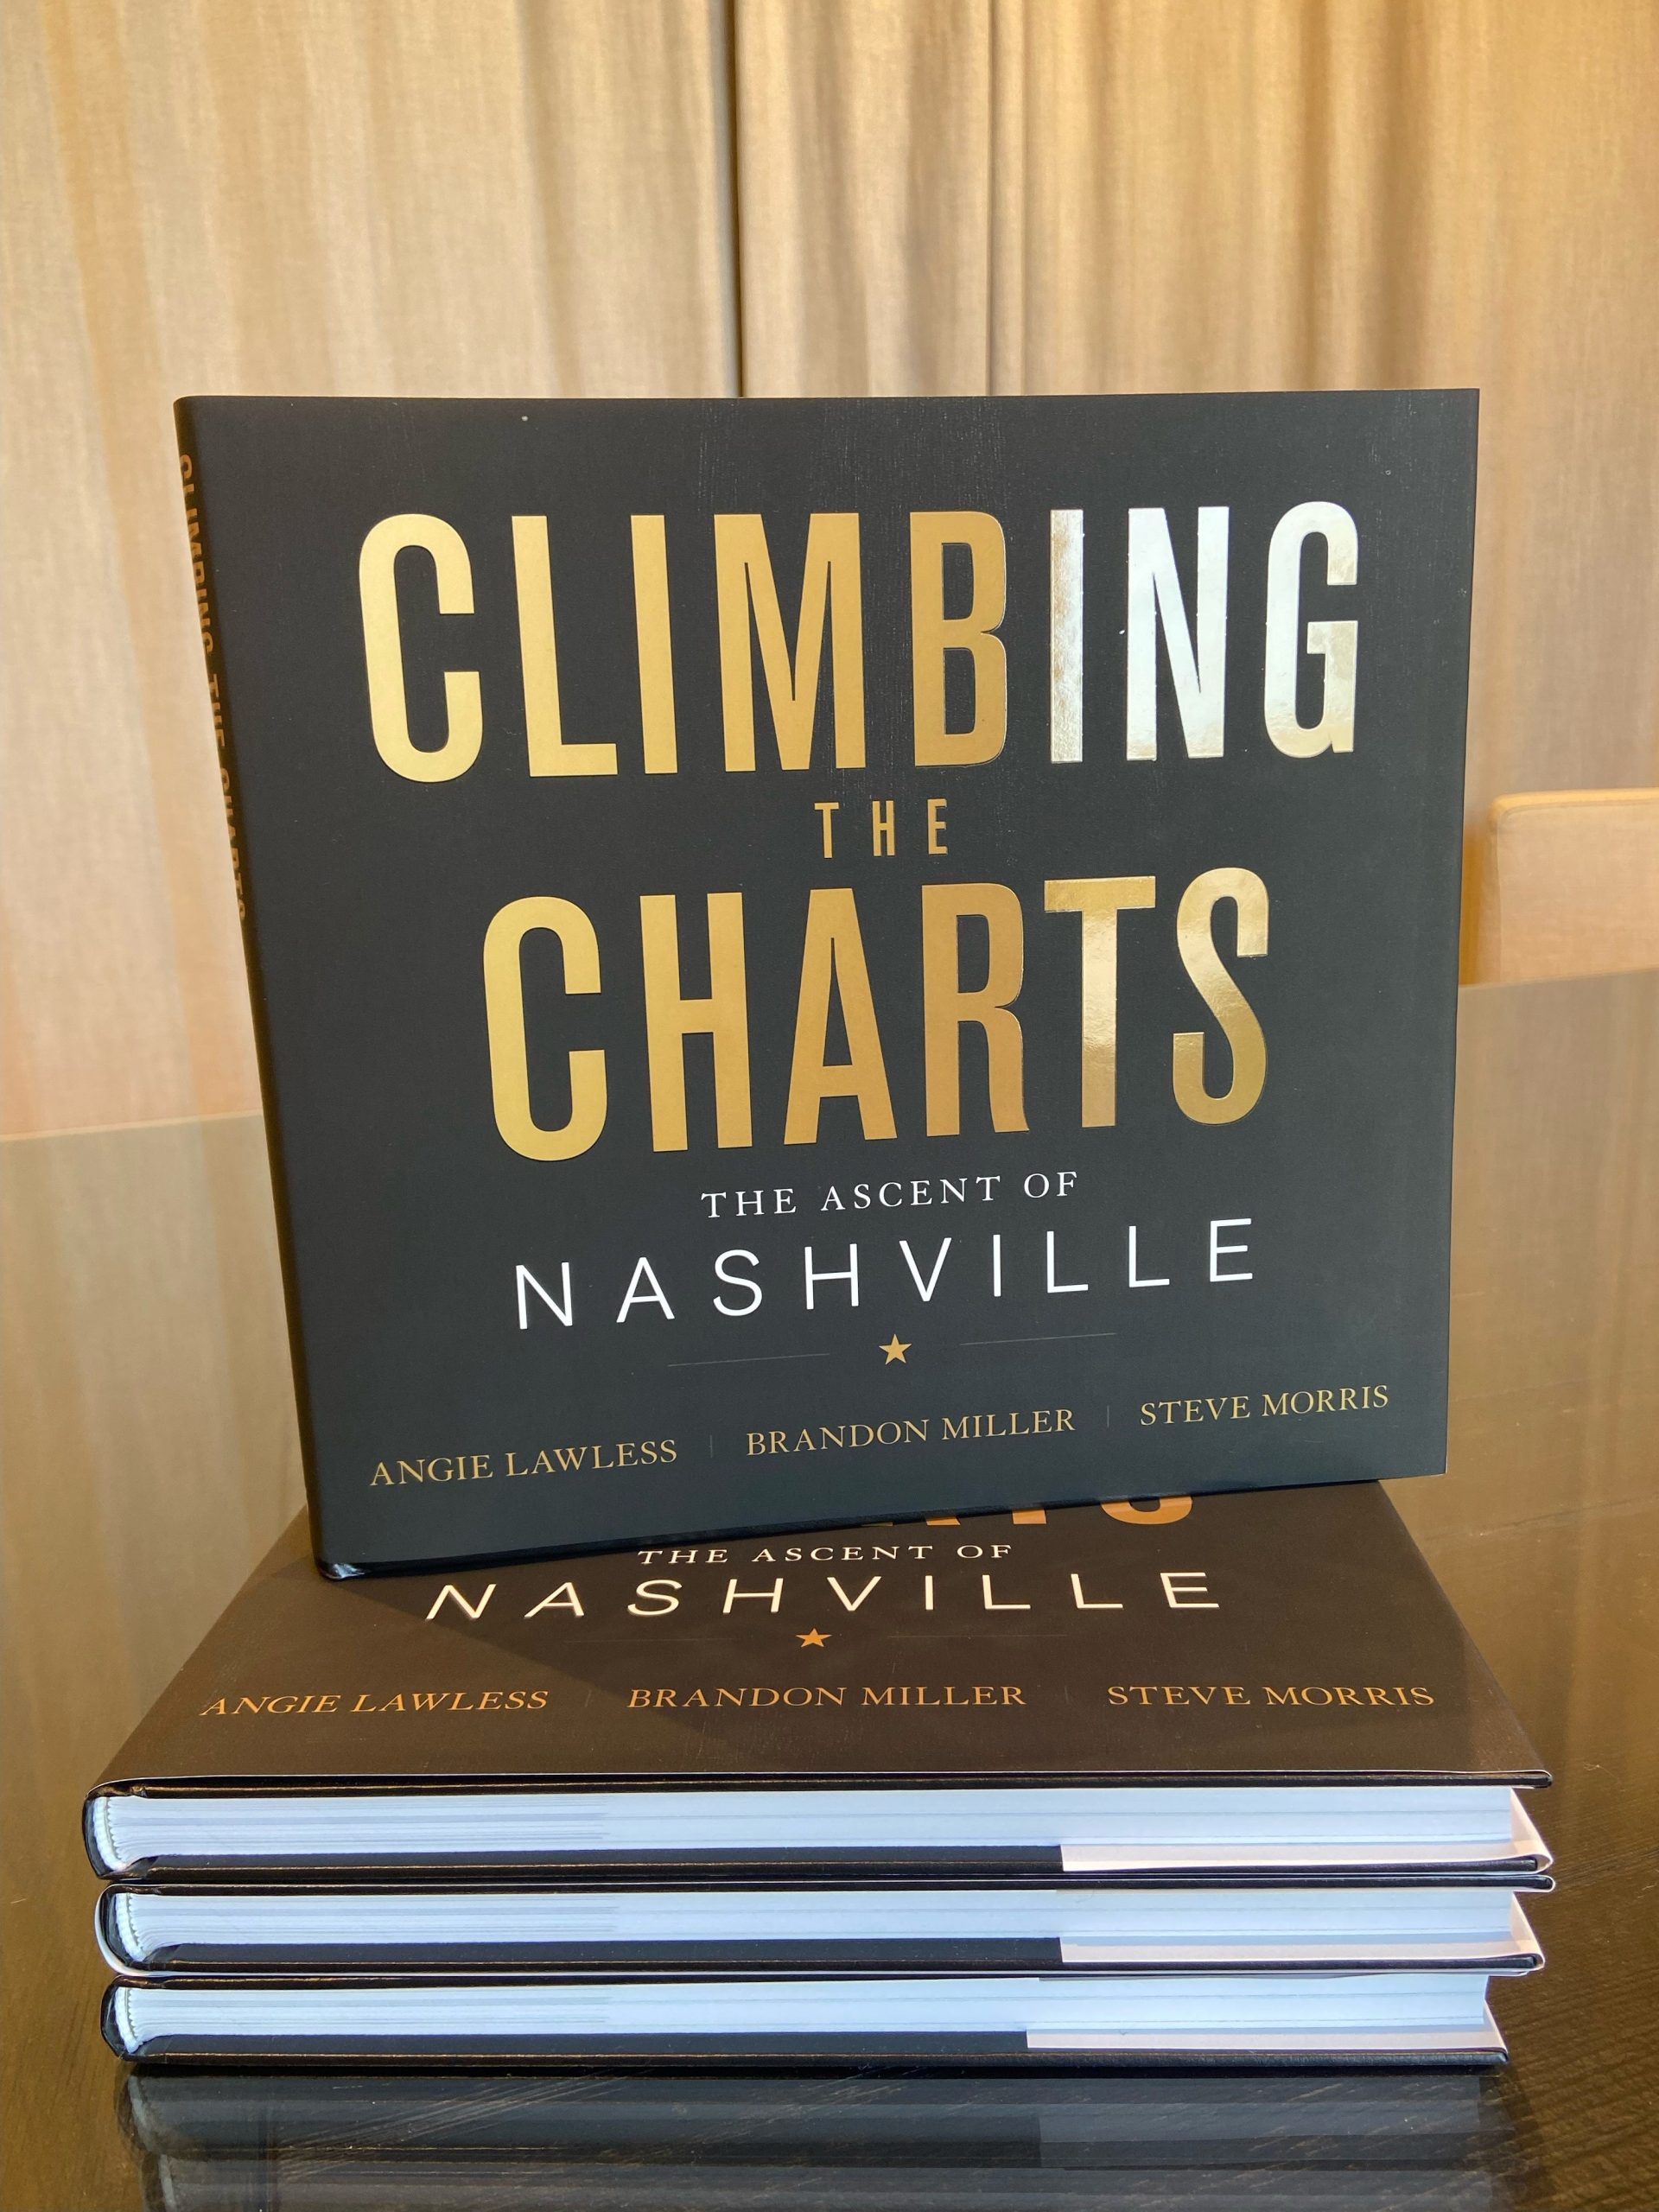 Climbing the Charts: The Ascent of Nashville